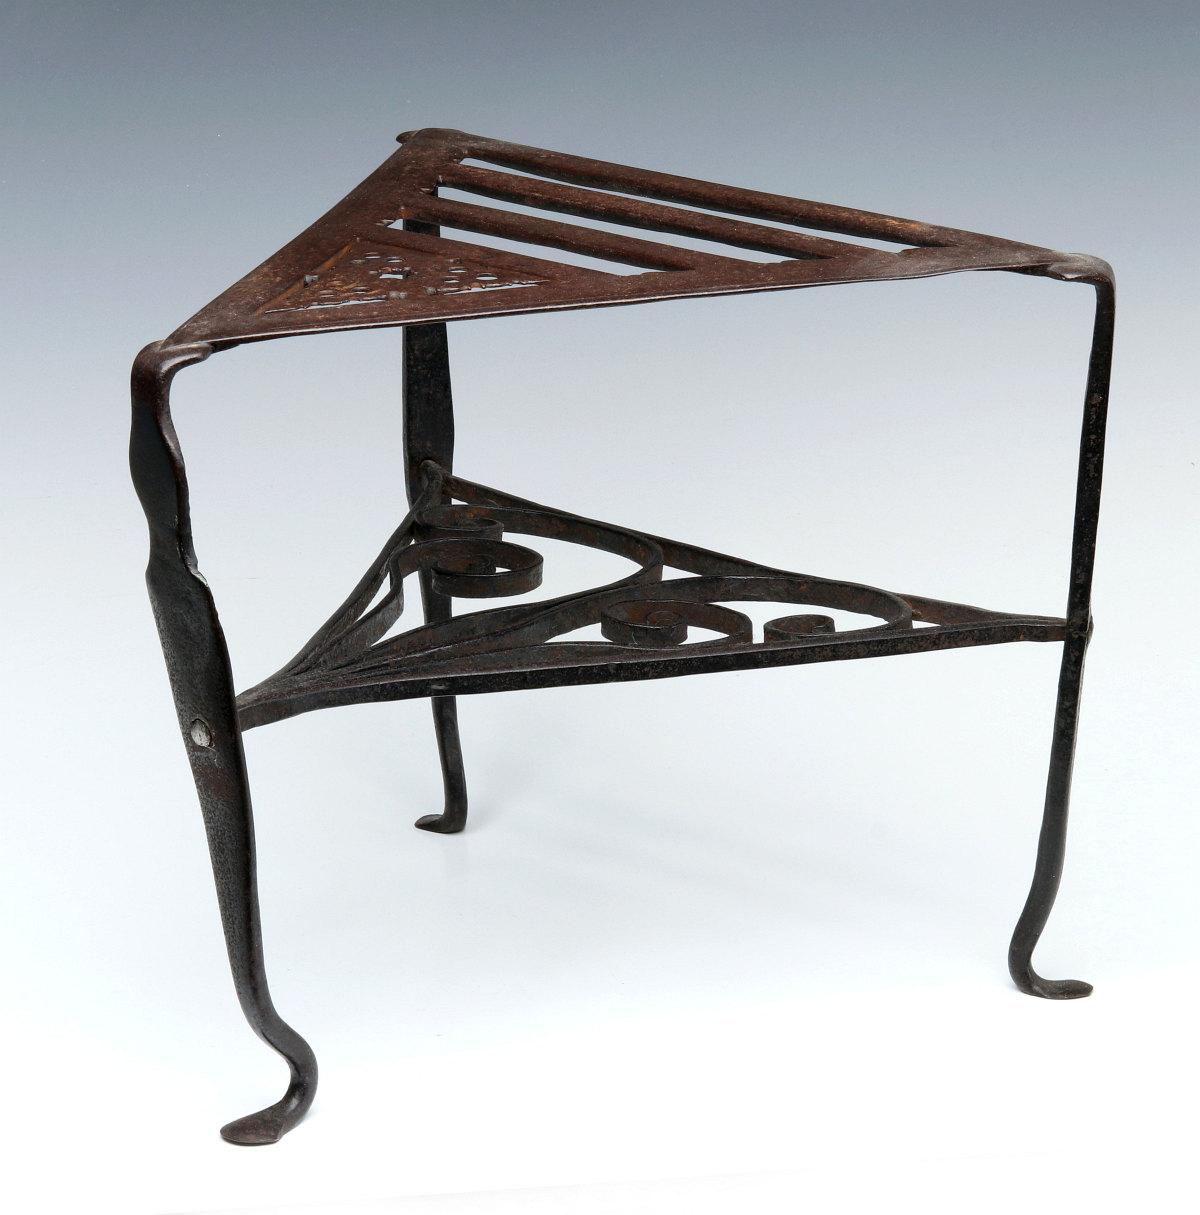 A LARGE 18TH CENTURY FORGED IRON FIREPLACE TRIVET